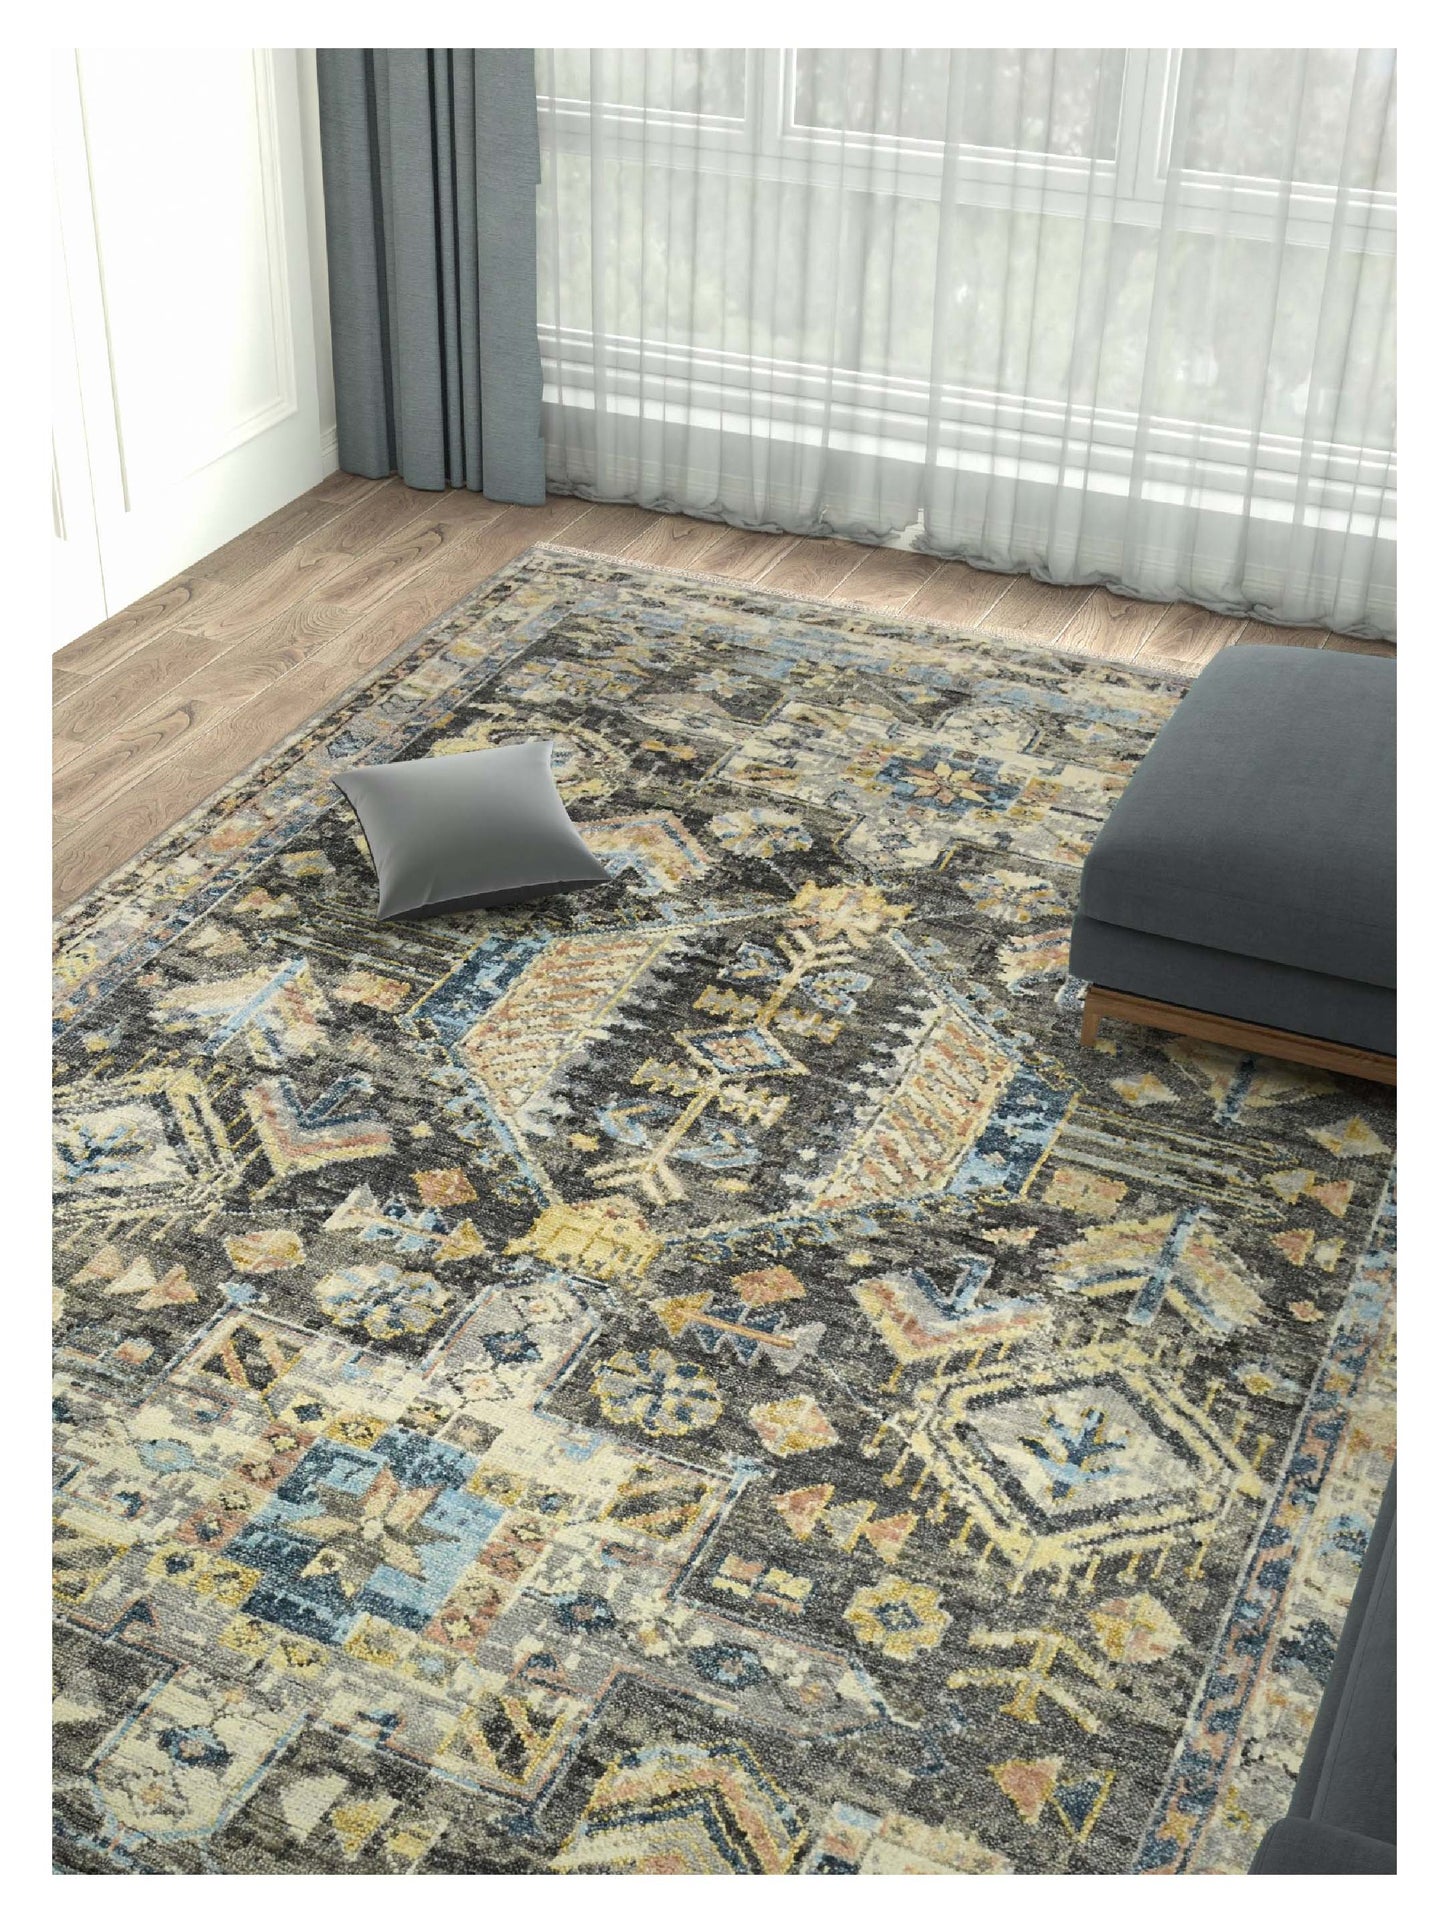 Limited Woodburn WOD-553 GRAY  Traditional Knotted Rug